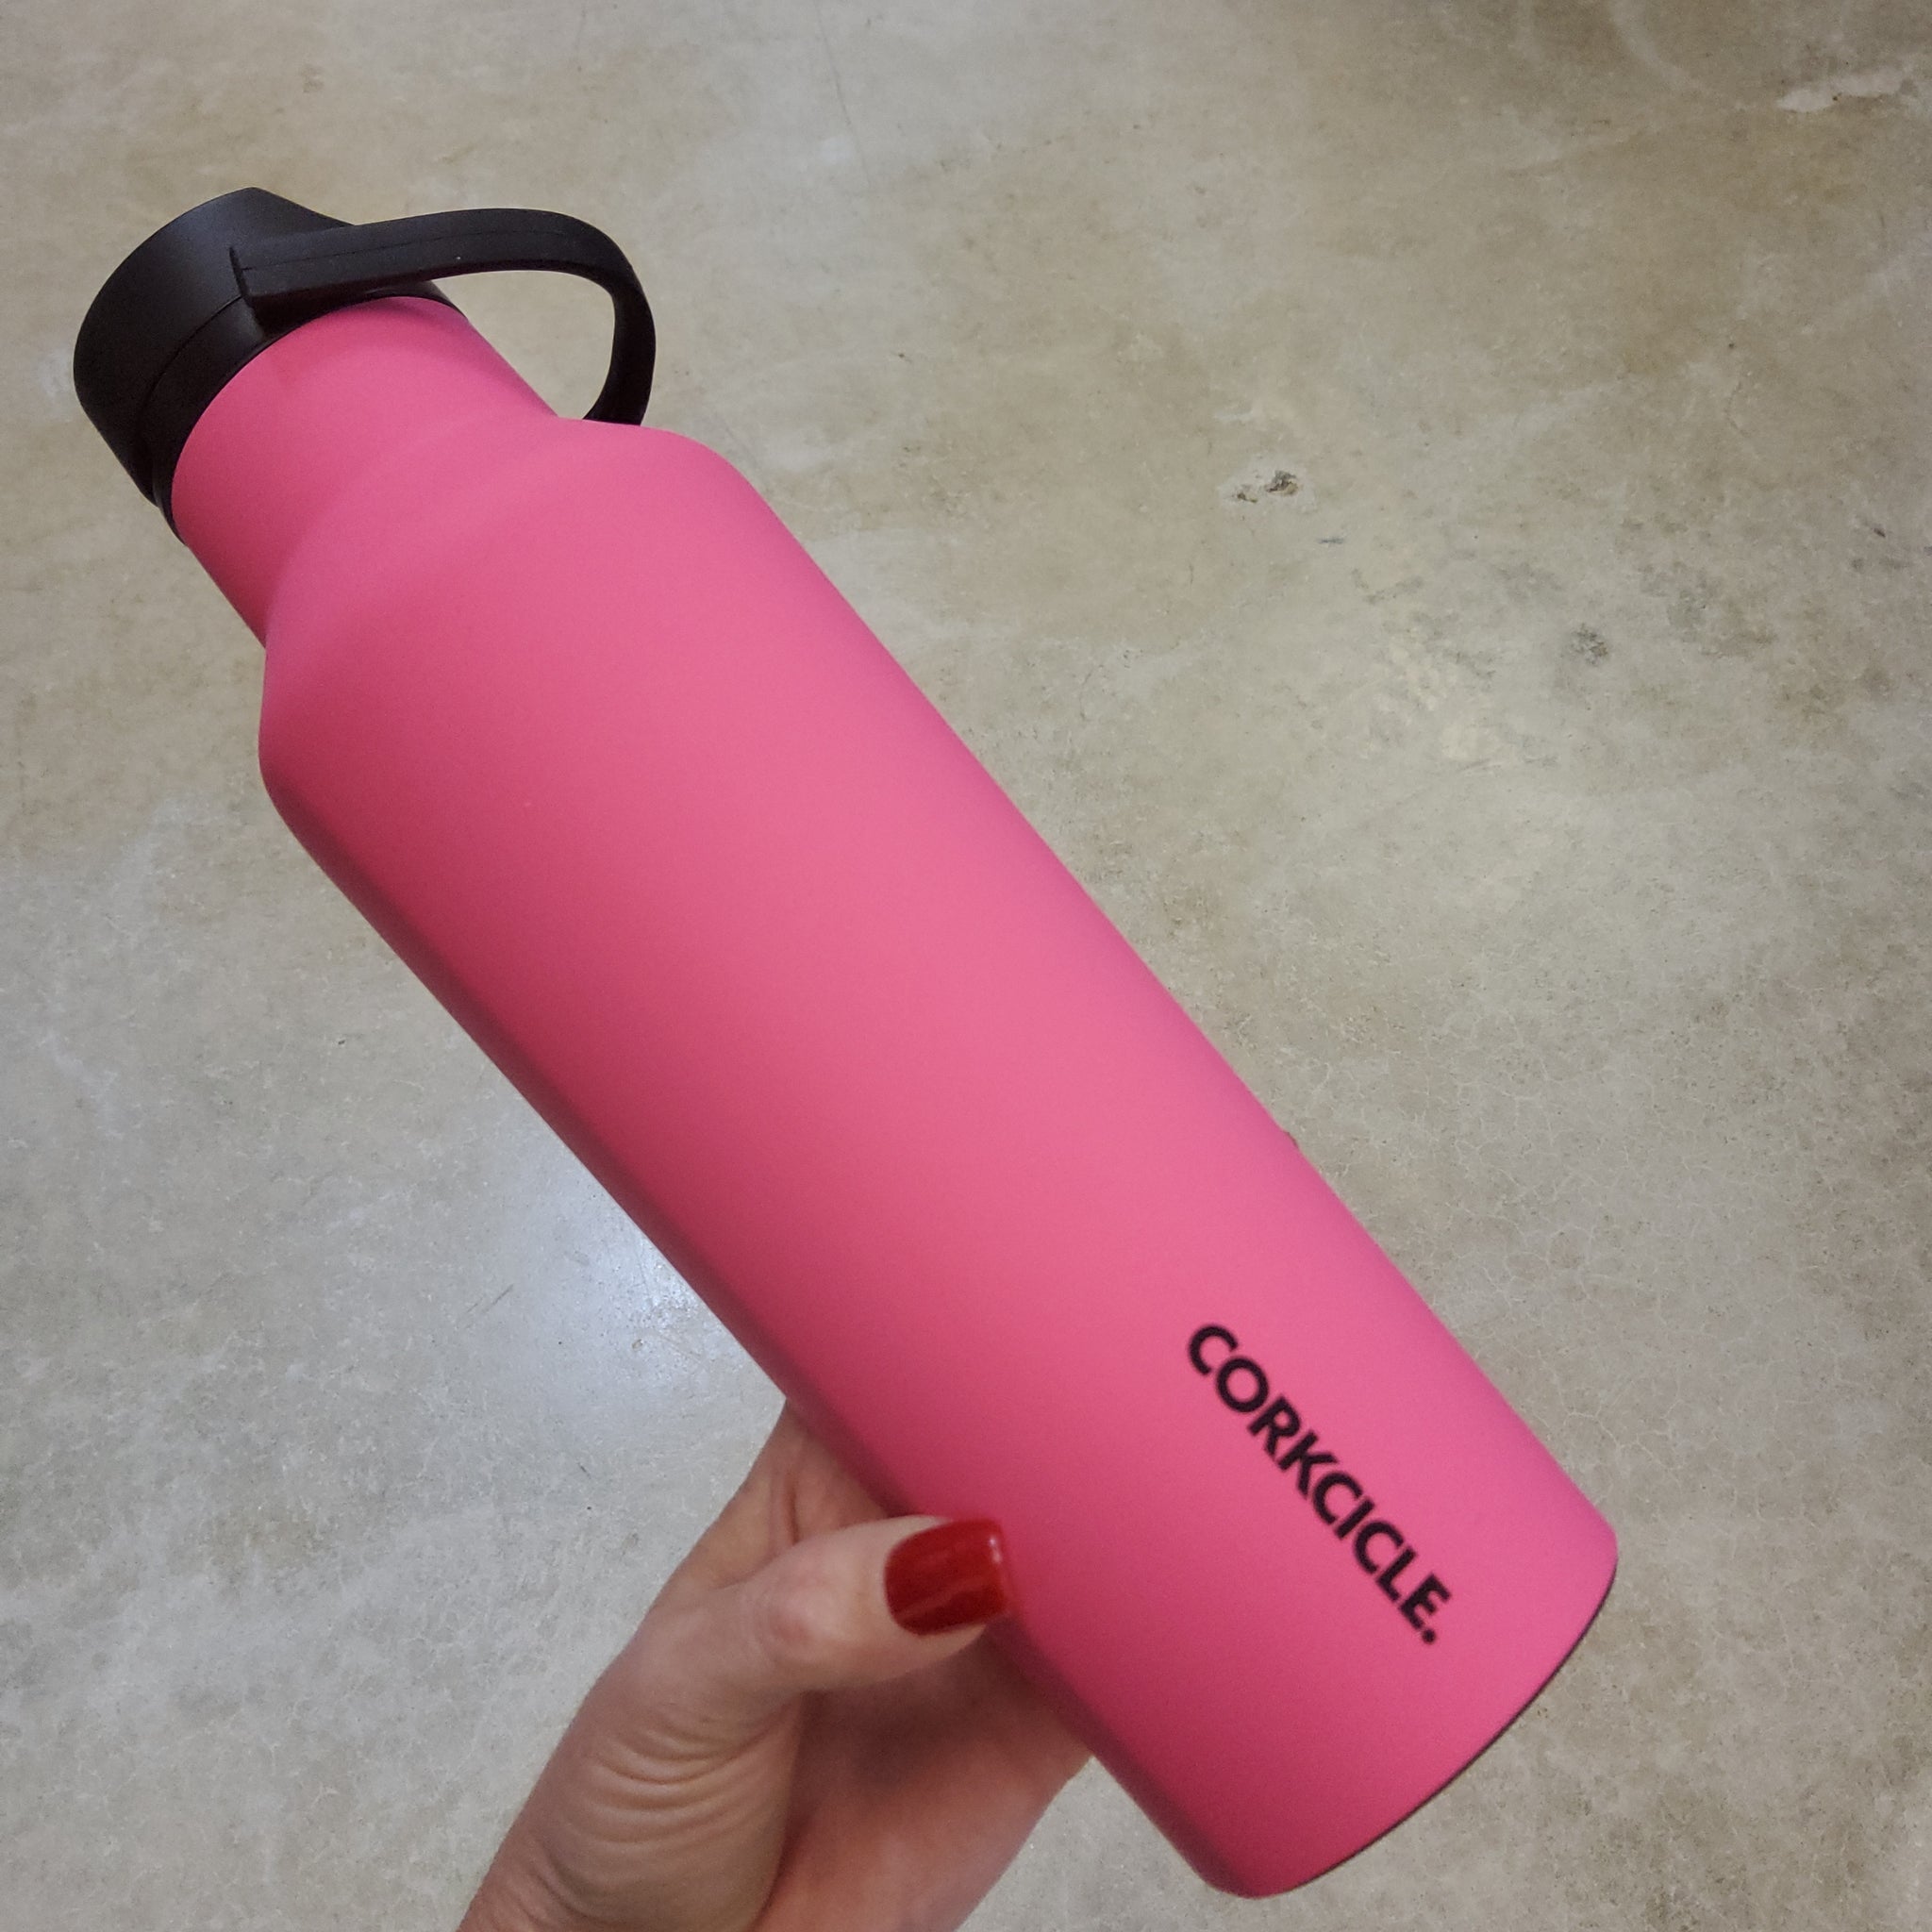 32 oz Corkcicle Sport Canteen with WORM - Dragonfruit